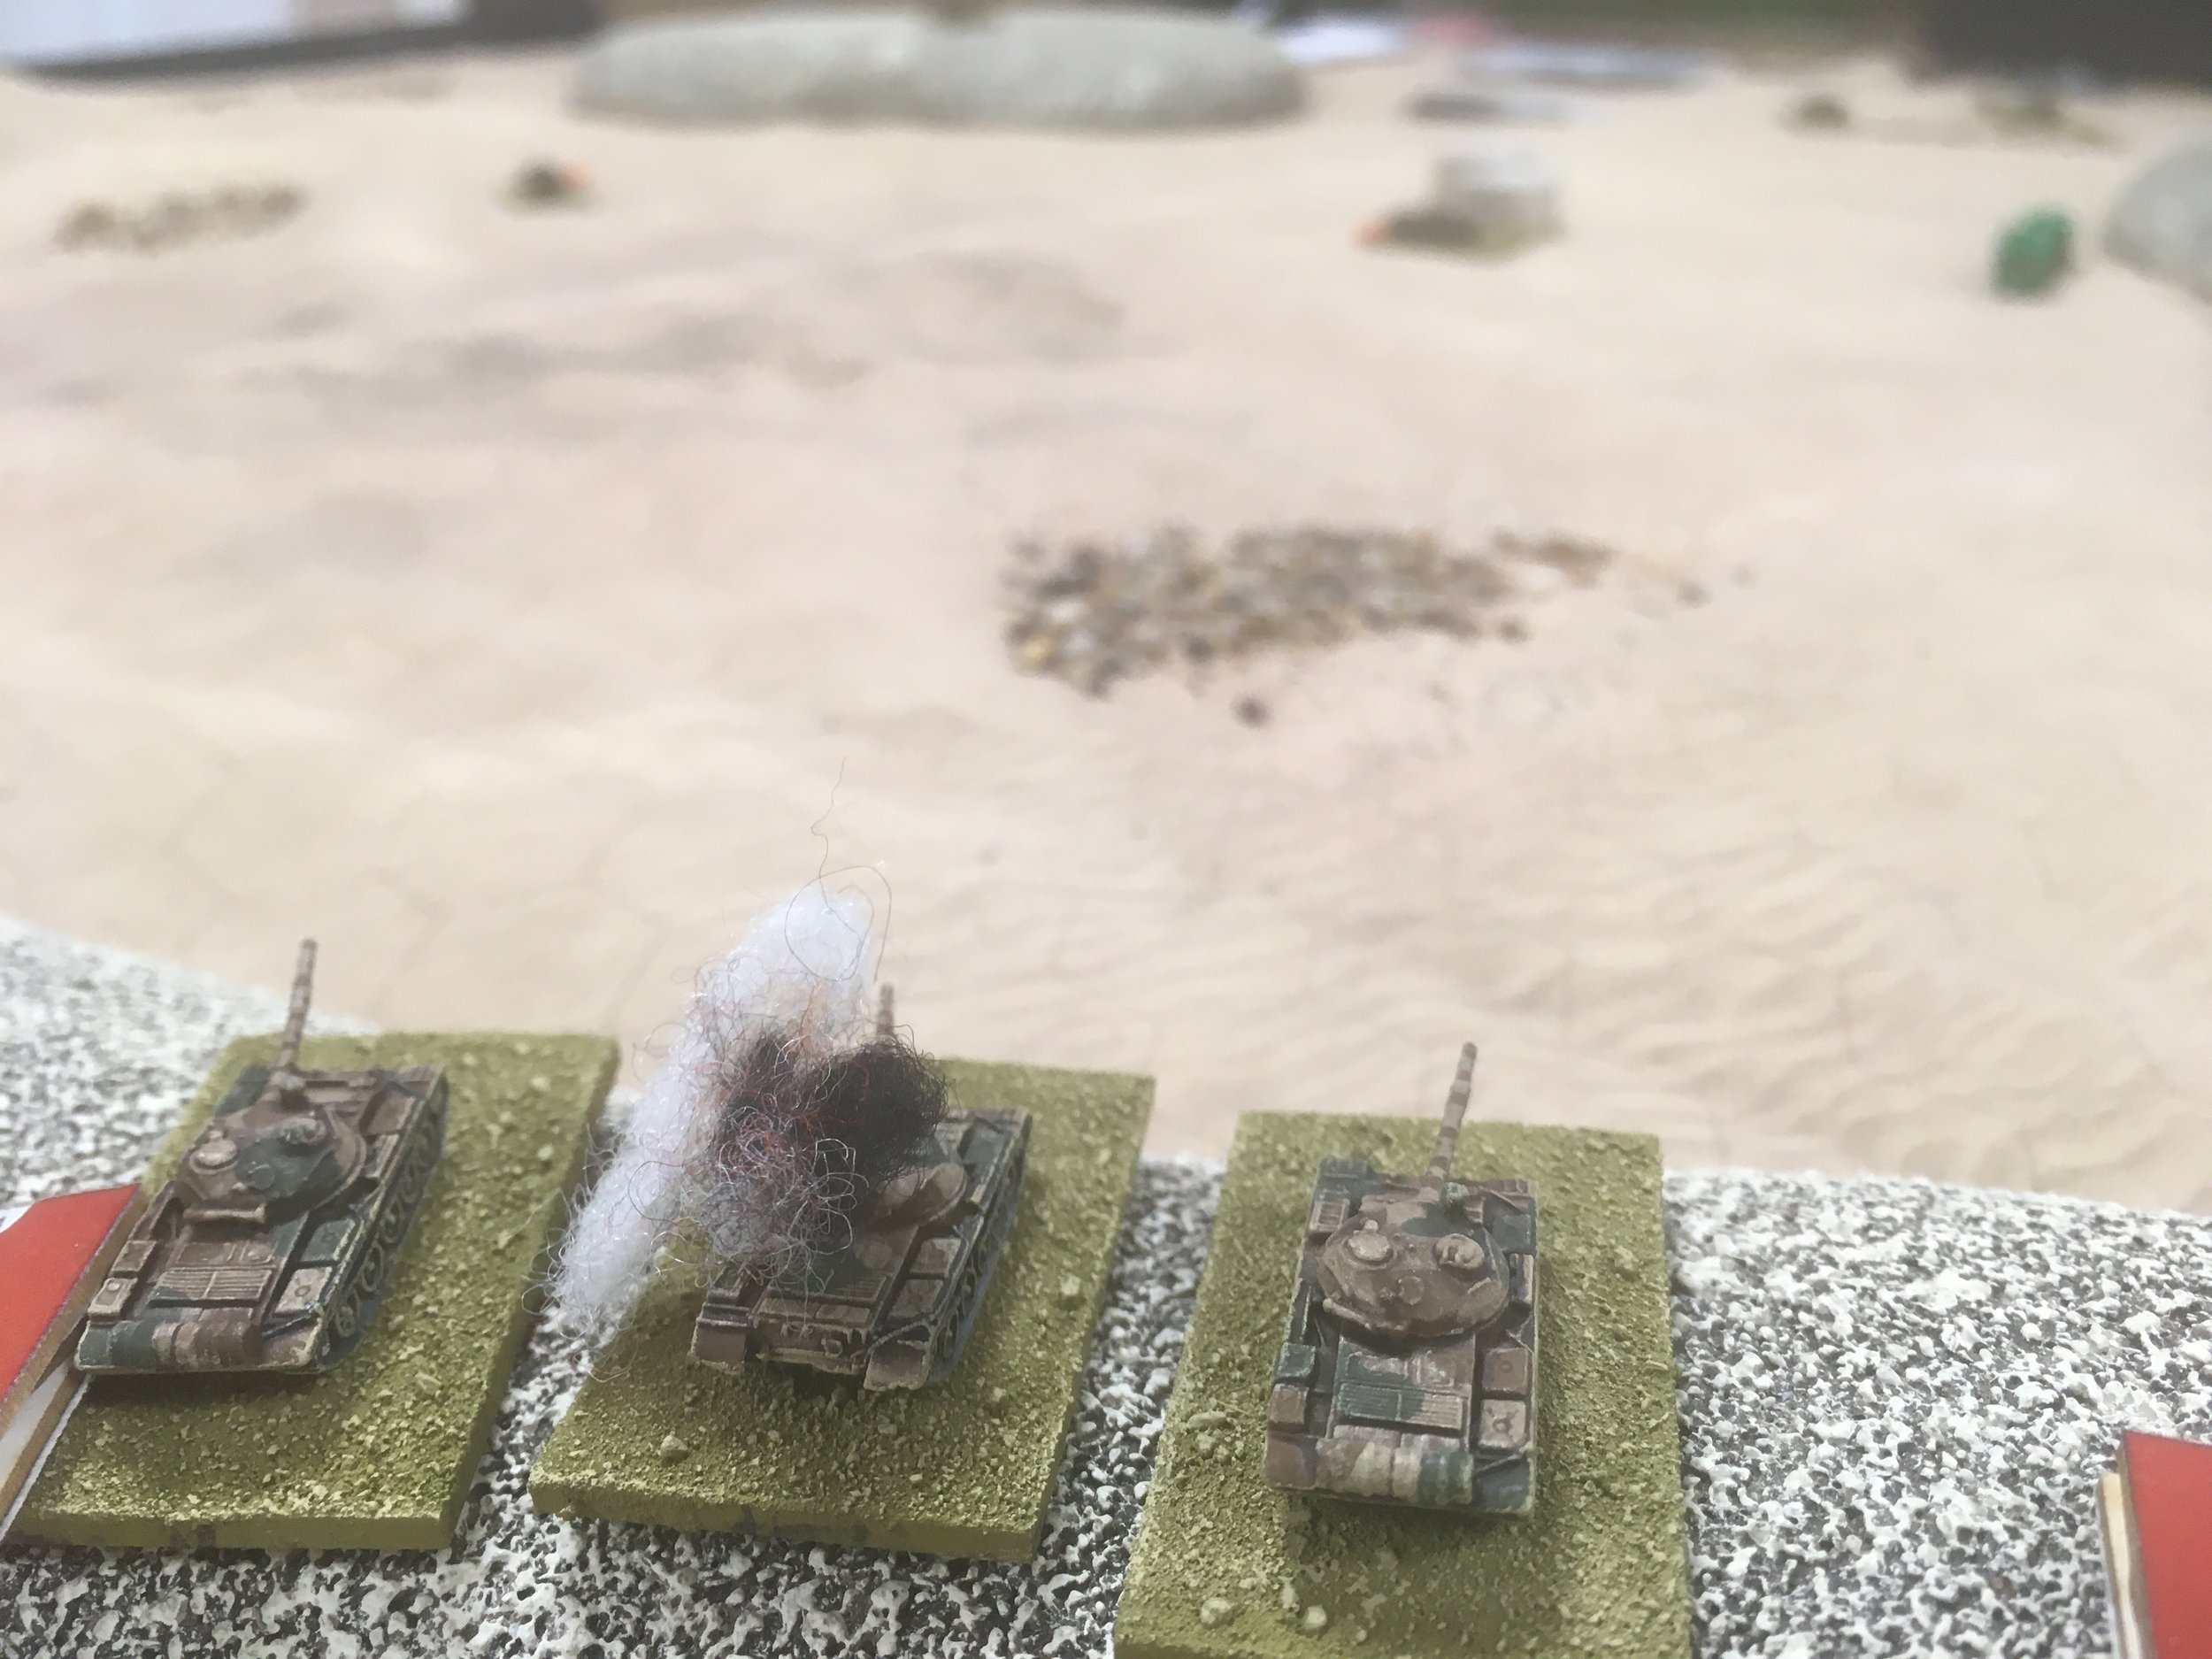 The central T-62 platoon, despite being being one tank down and the two survivors carrying Shock, opened fire...